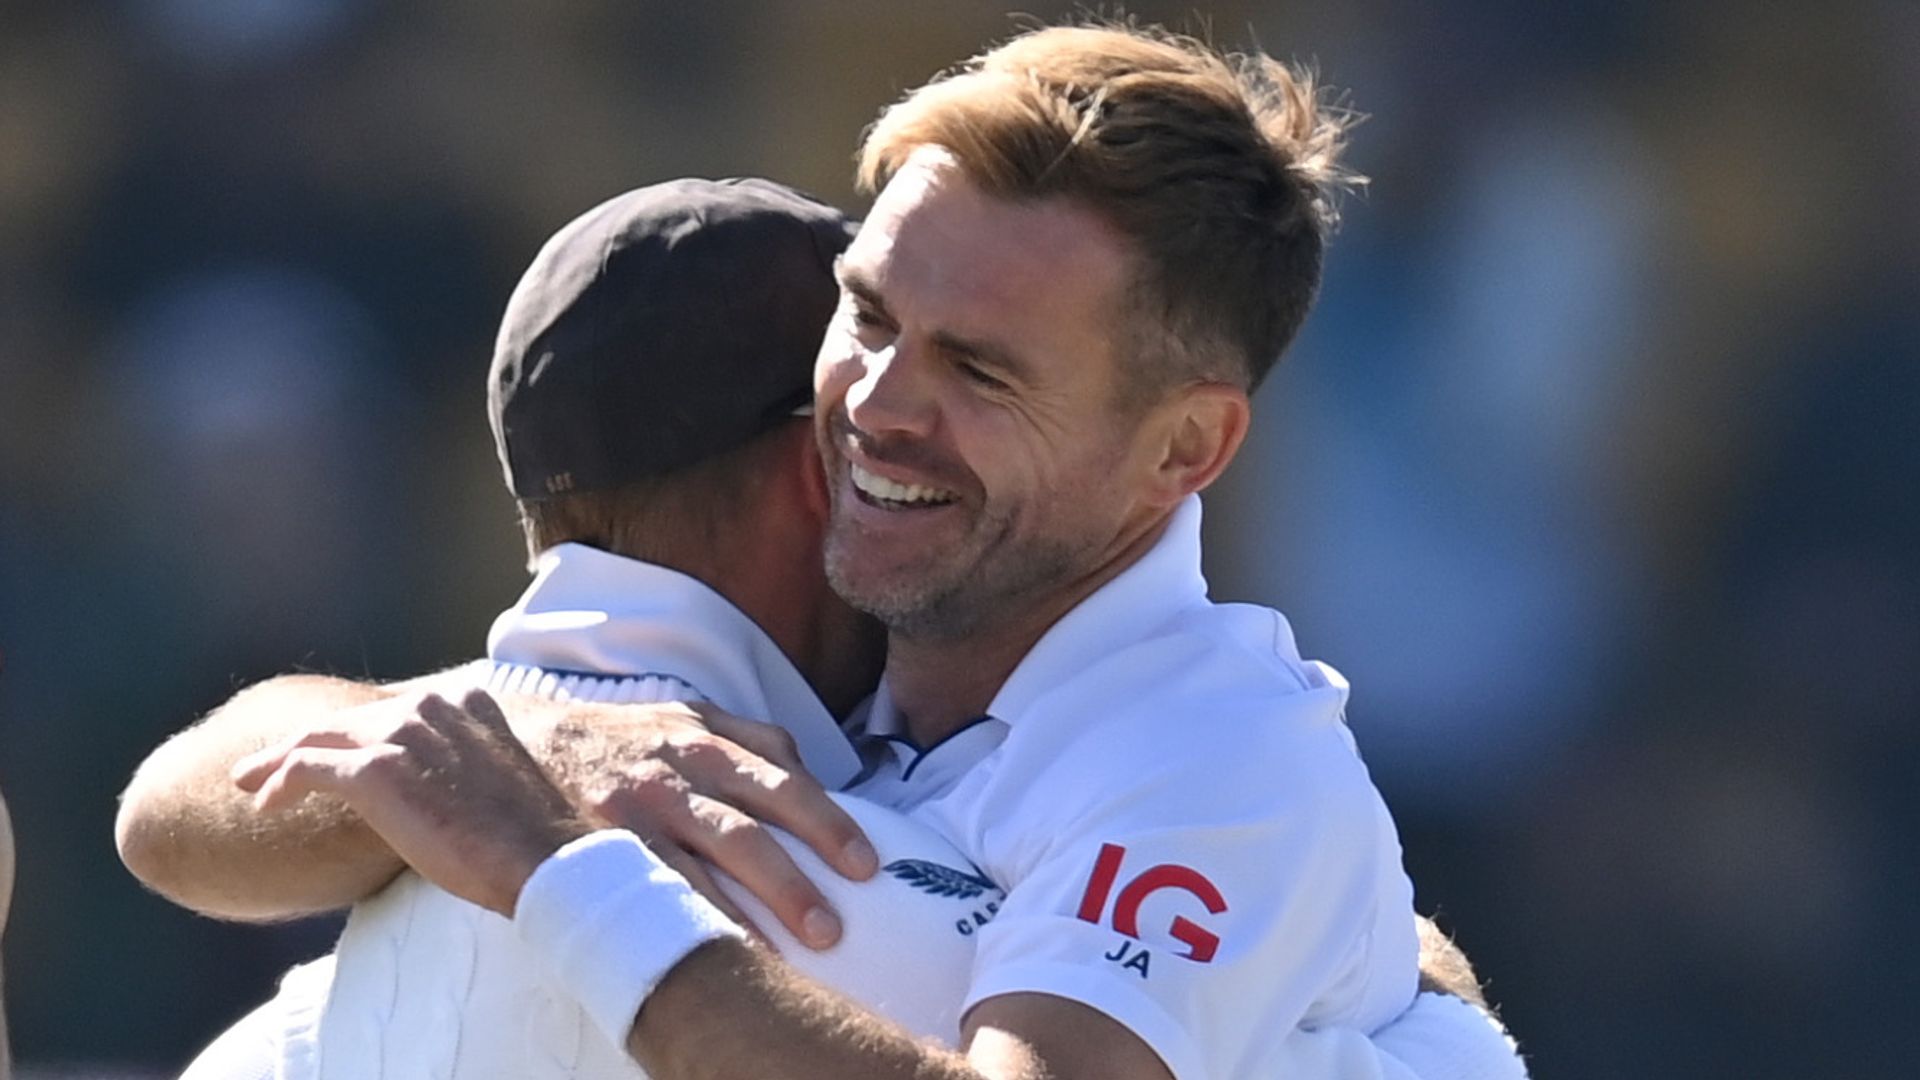 700 wickets and far from 'bloody tired' - Anderson's remarkable journey